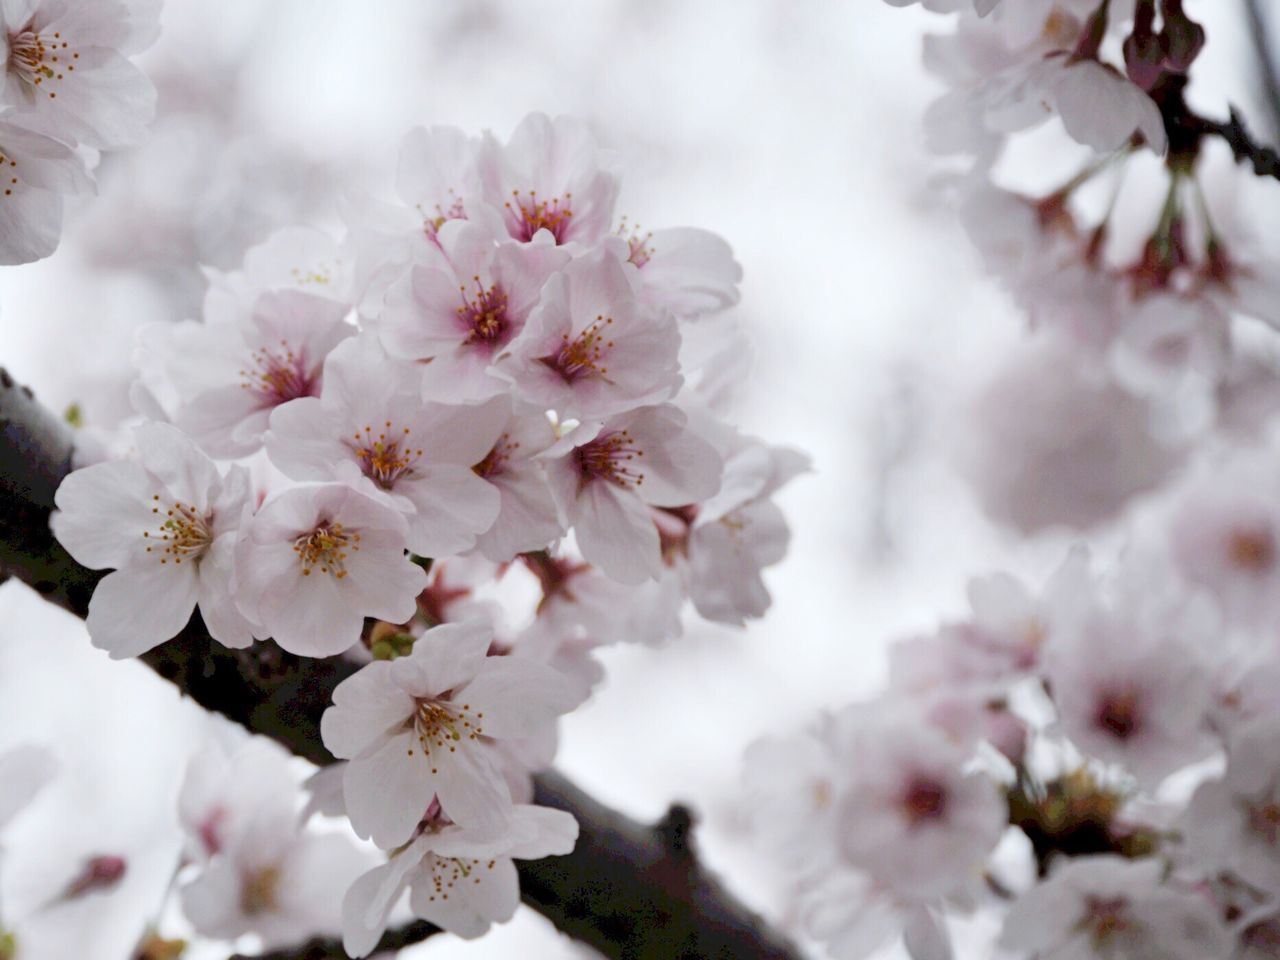 growth, flower, nature, tree, beauty in nature, fragility, close-up, blossom, freshness, branch, twig, petal, no people, outdoors, day, plum blossom, flower head